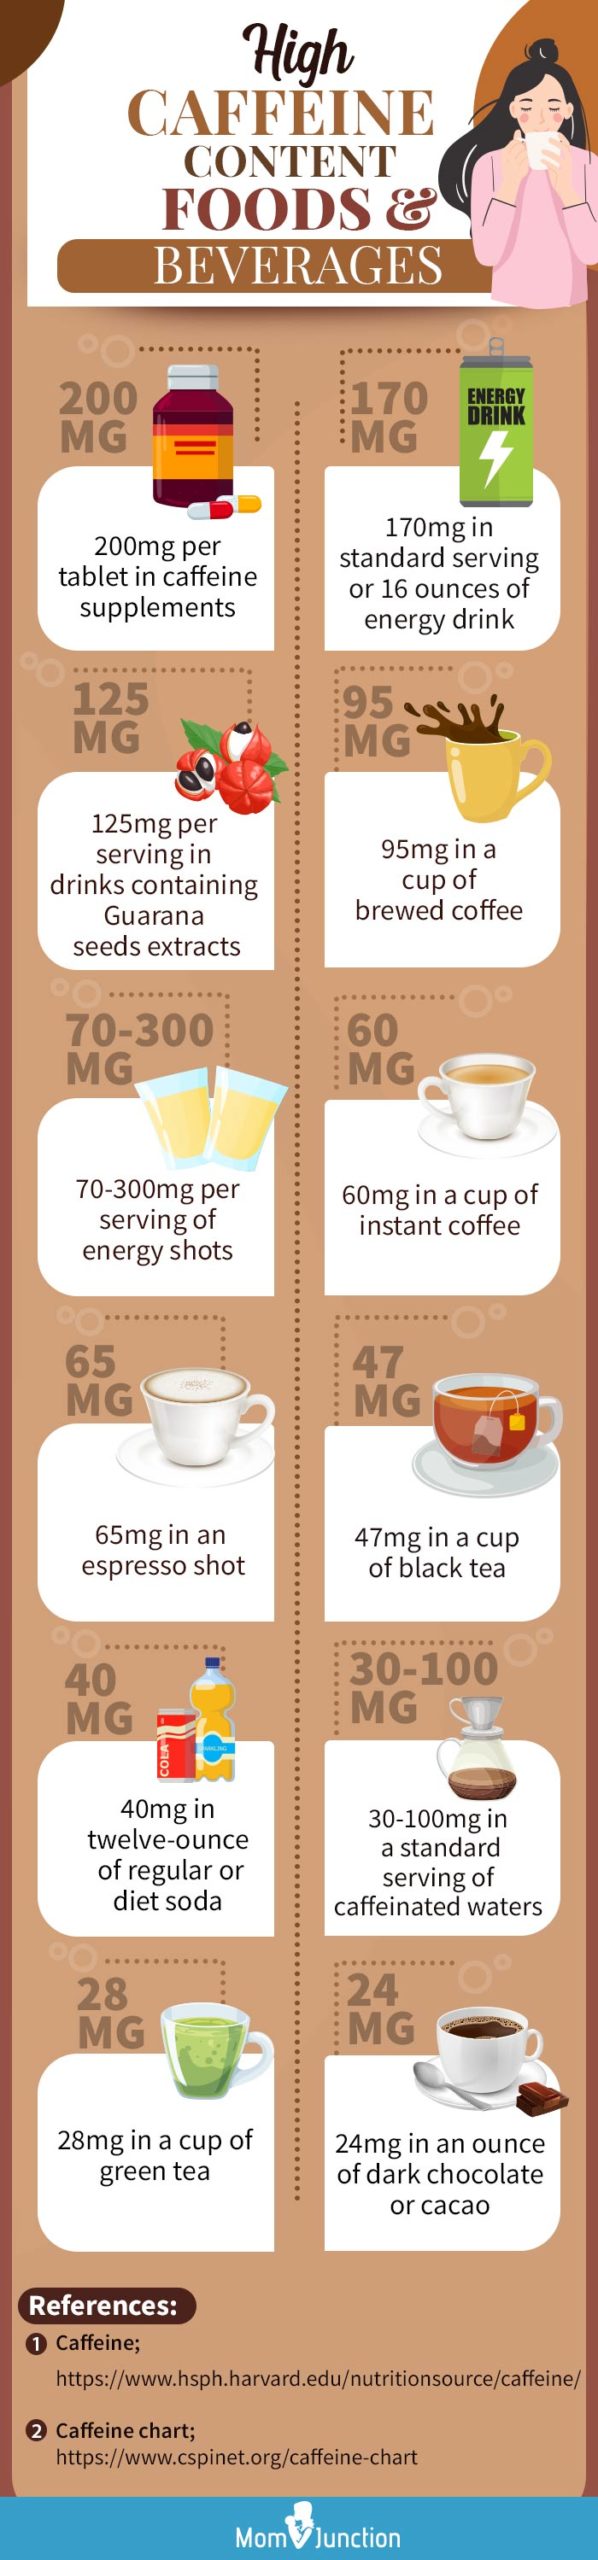 high caffeine content foods and beverages [infographic]